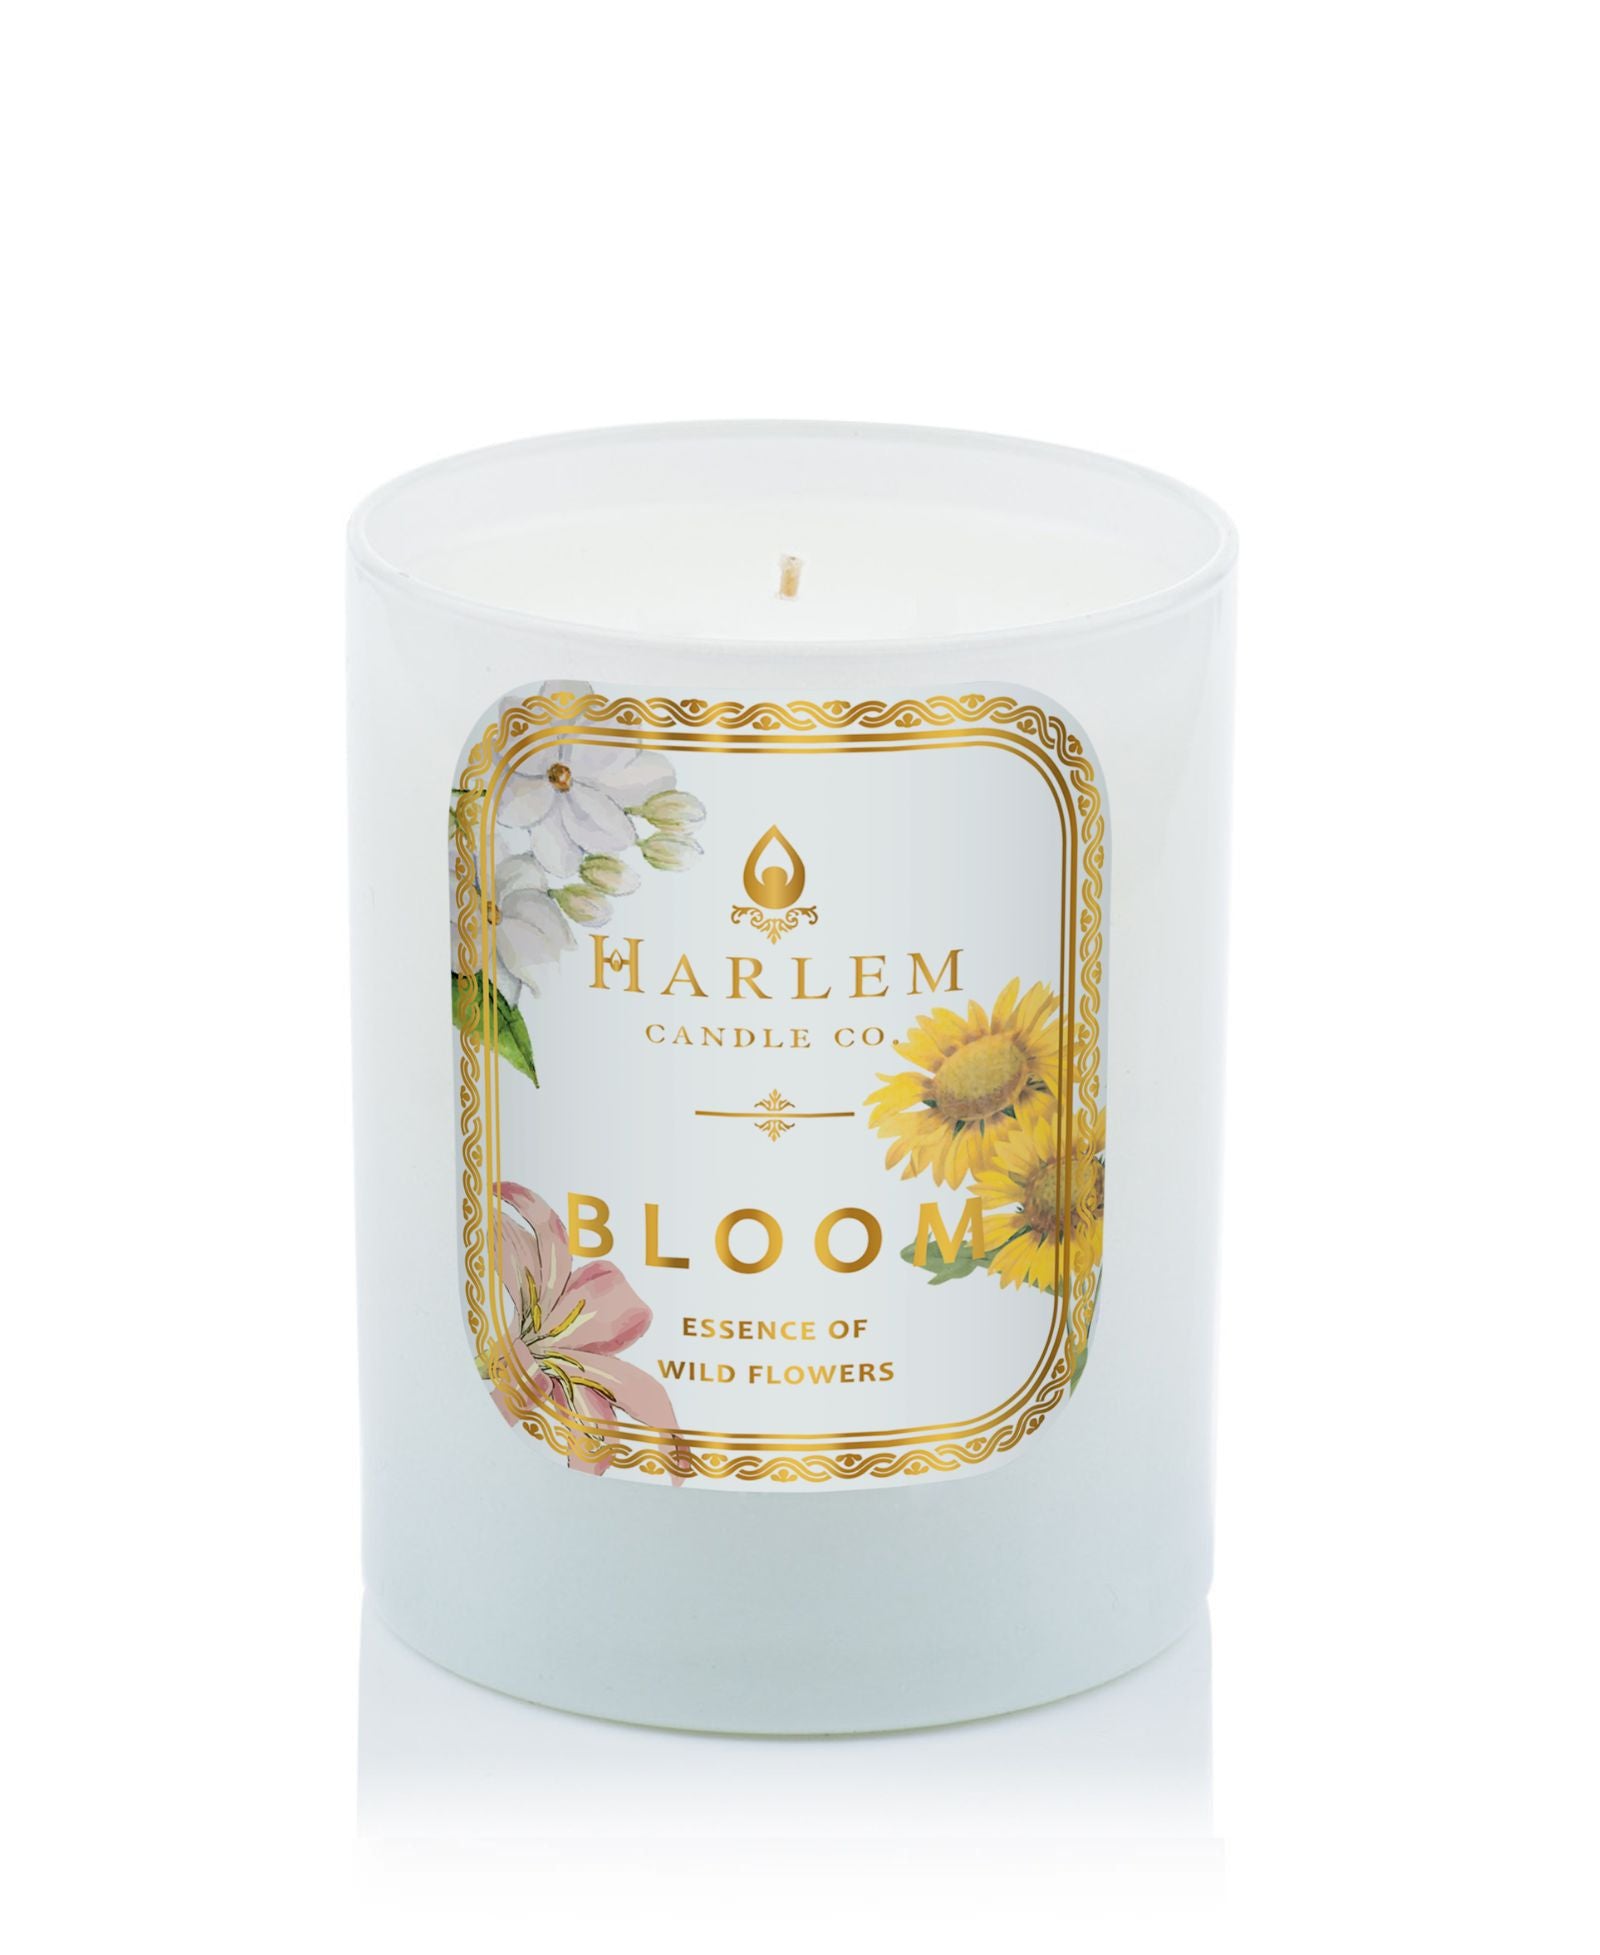 This is an image of our bloom candle in a white glass with flowers on the label.